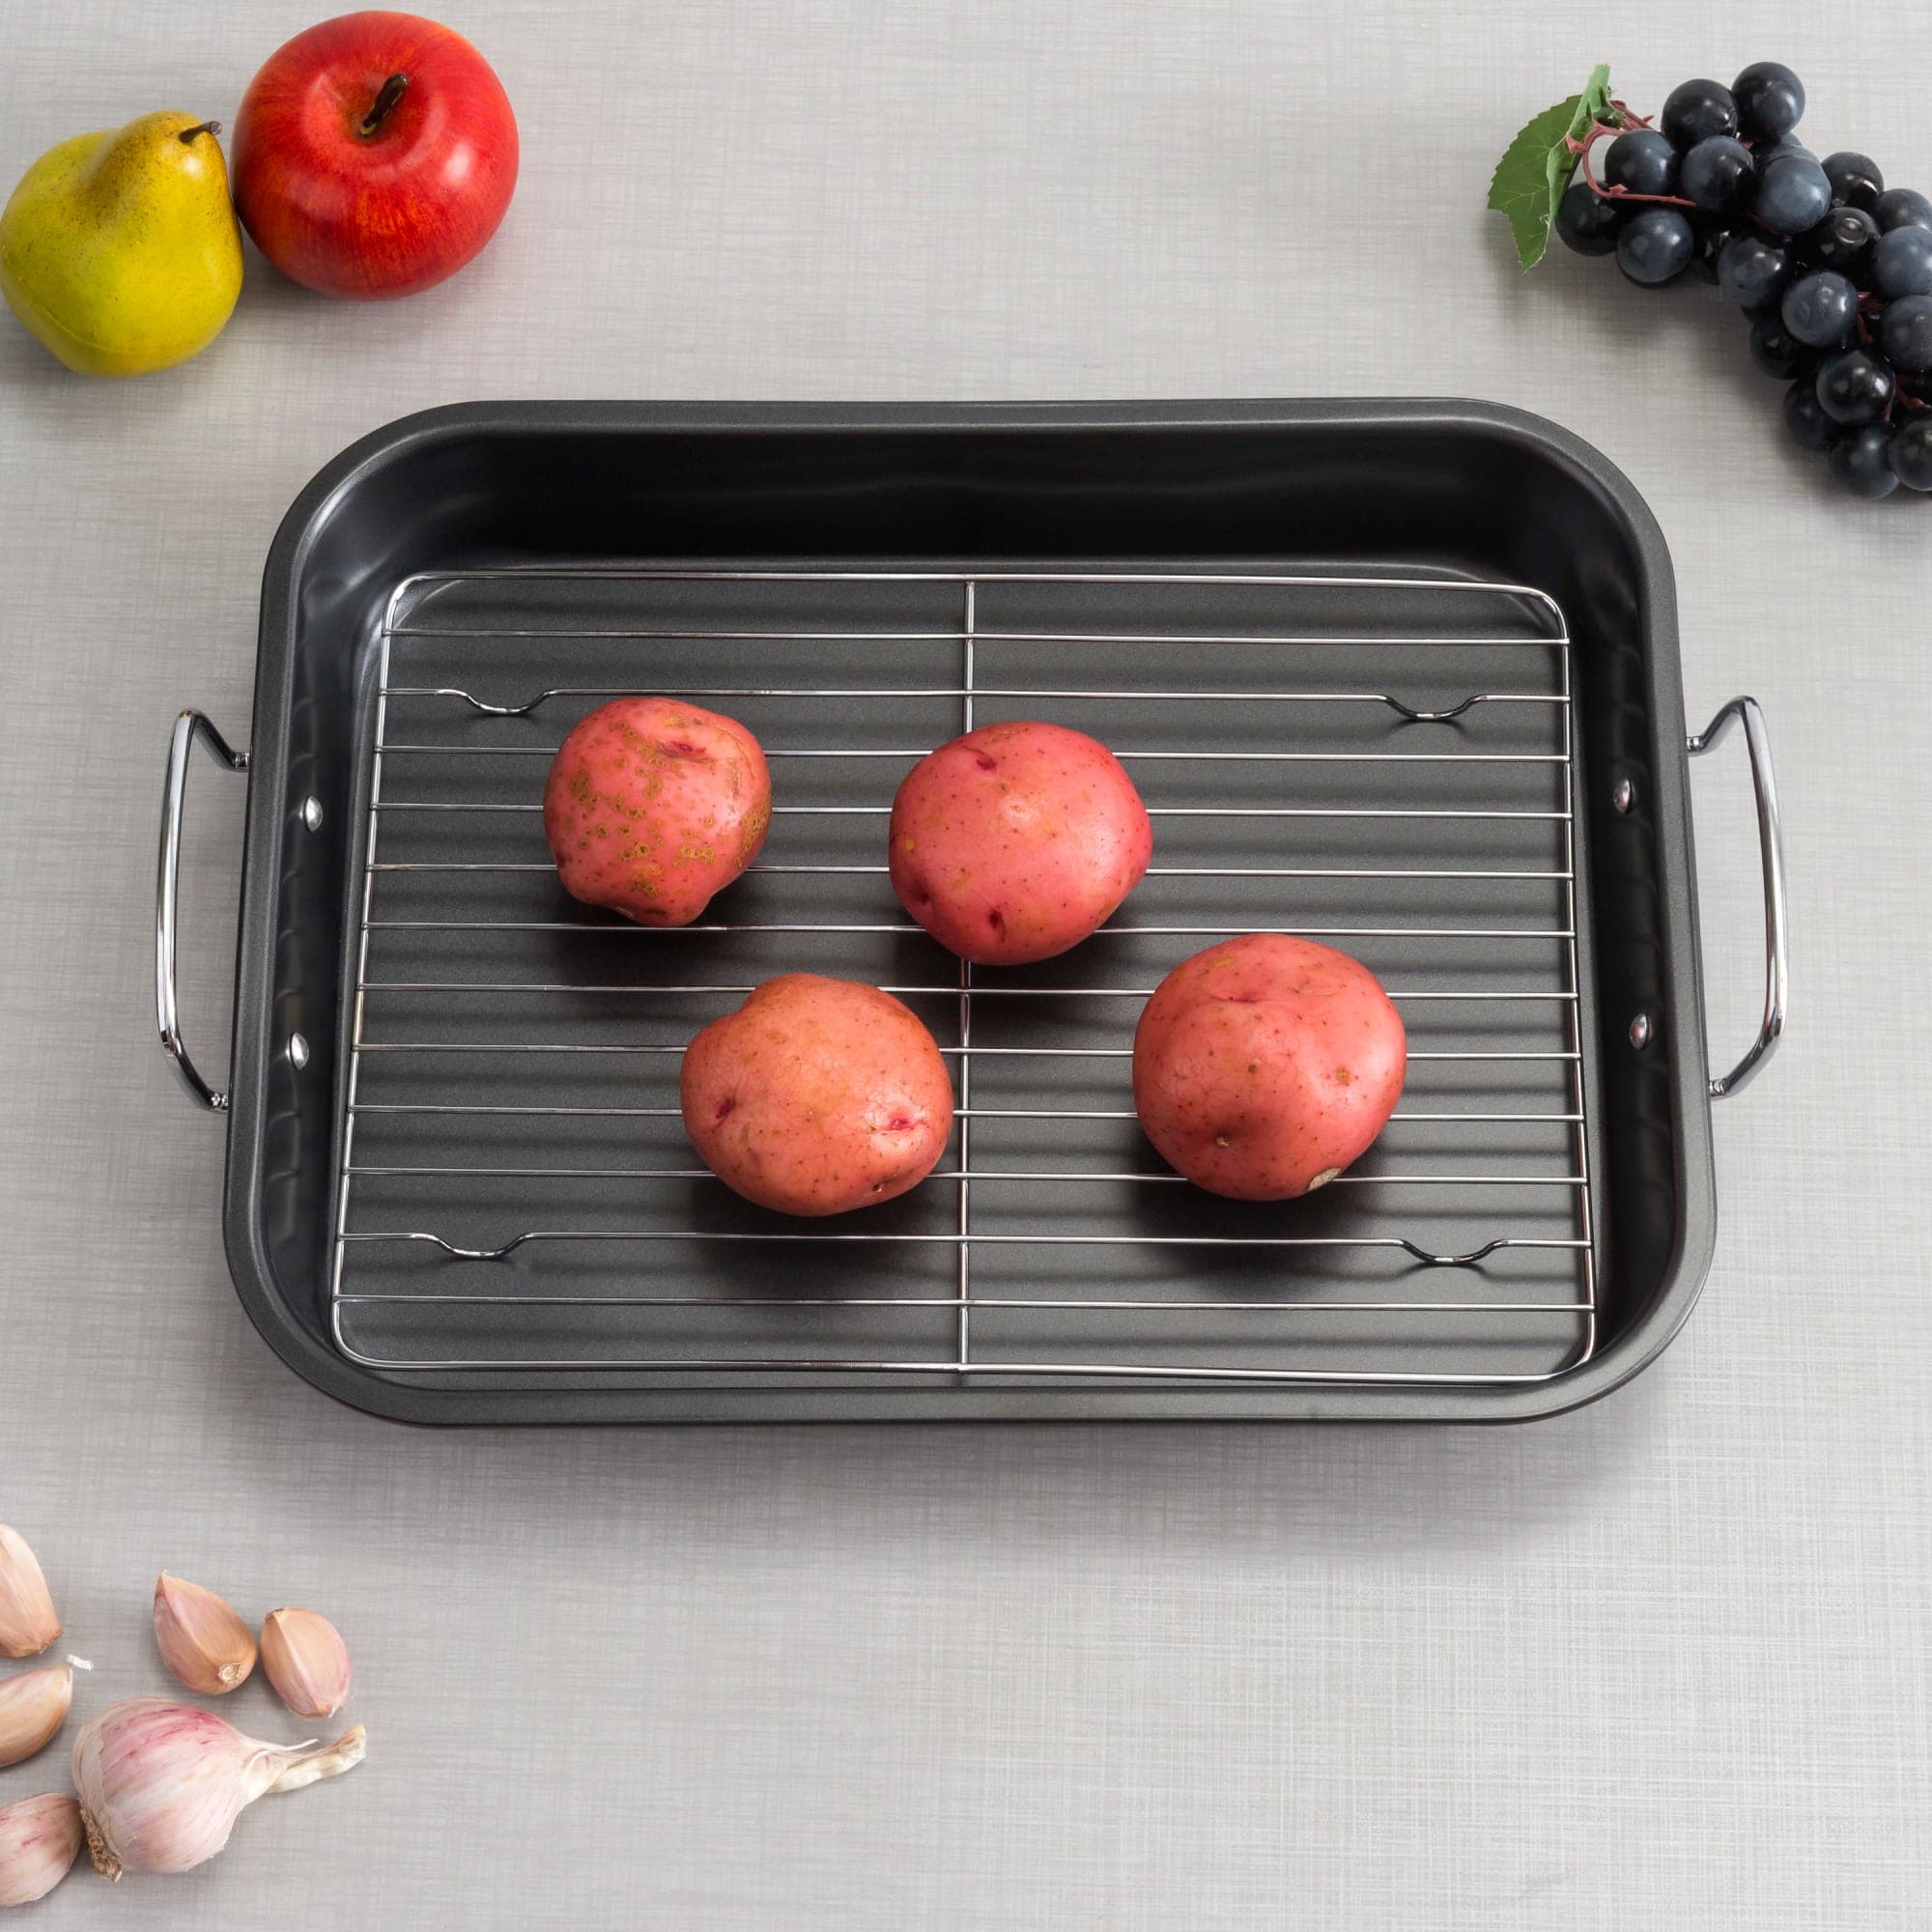 Home Basics Roast Pan with Grill Rack, Grey $10.00 EACH, CASE PACK OF 6